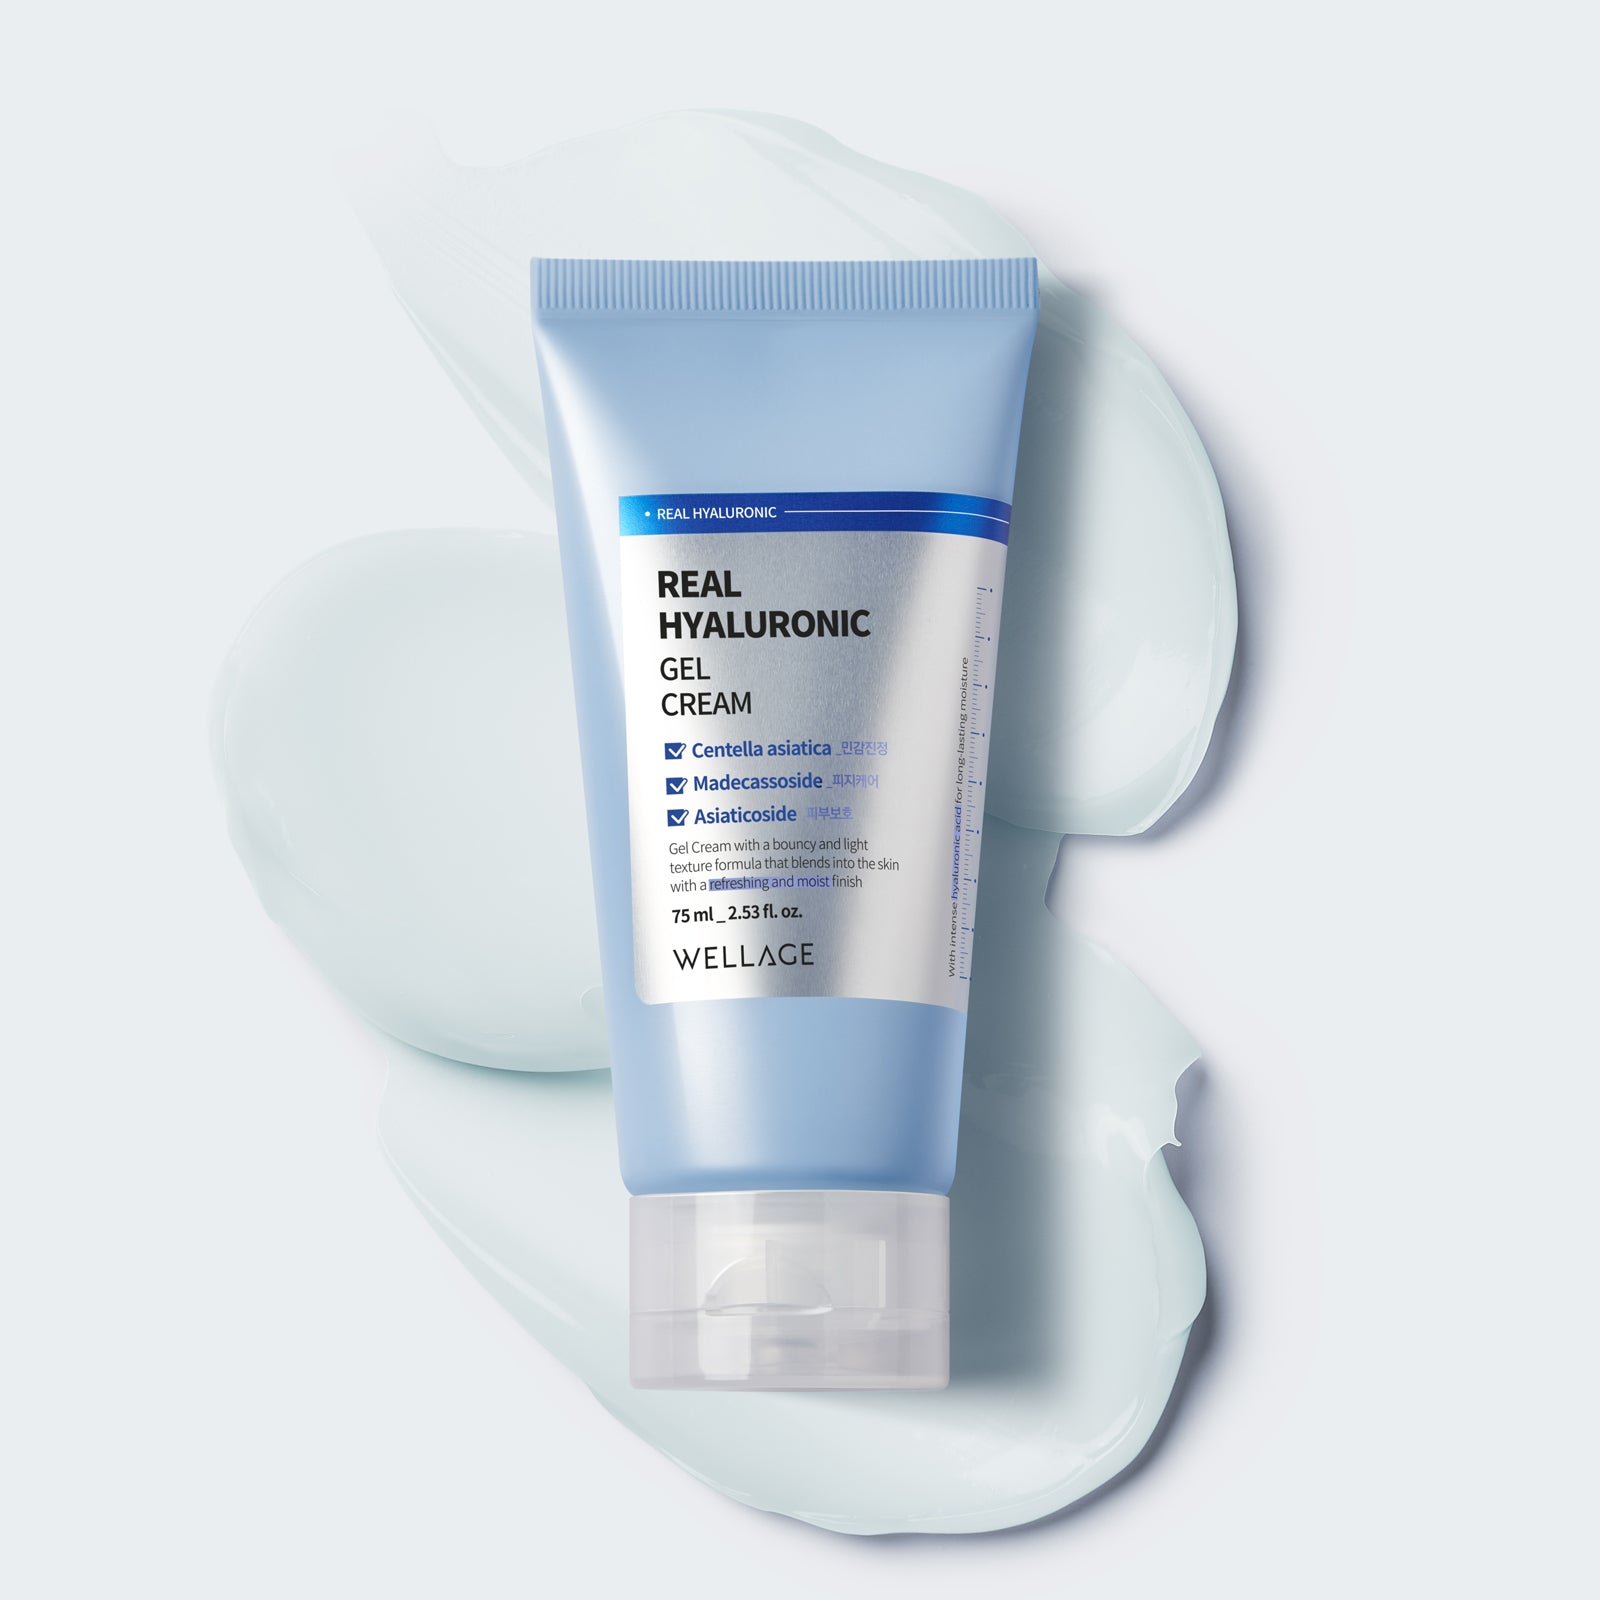 WELLAGE Real Hyaluronic Gel Cream on sales on our Website !